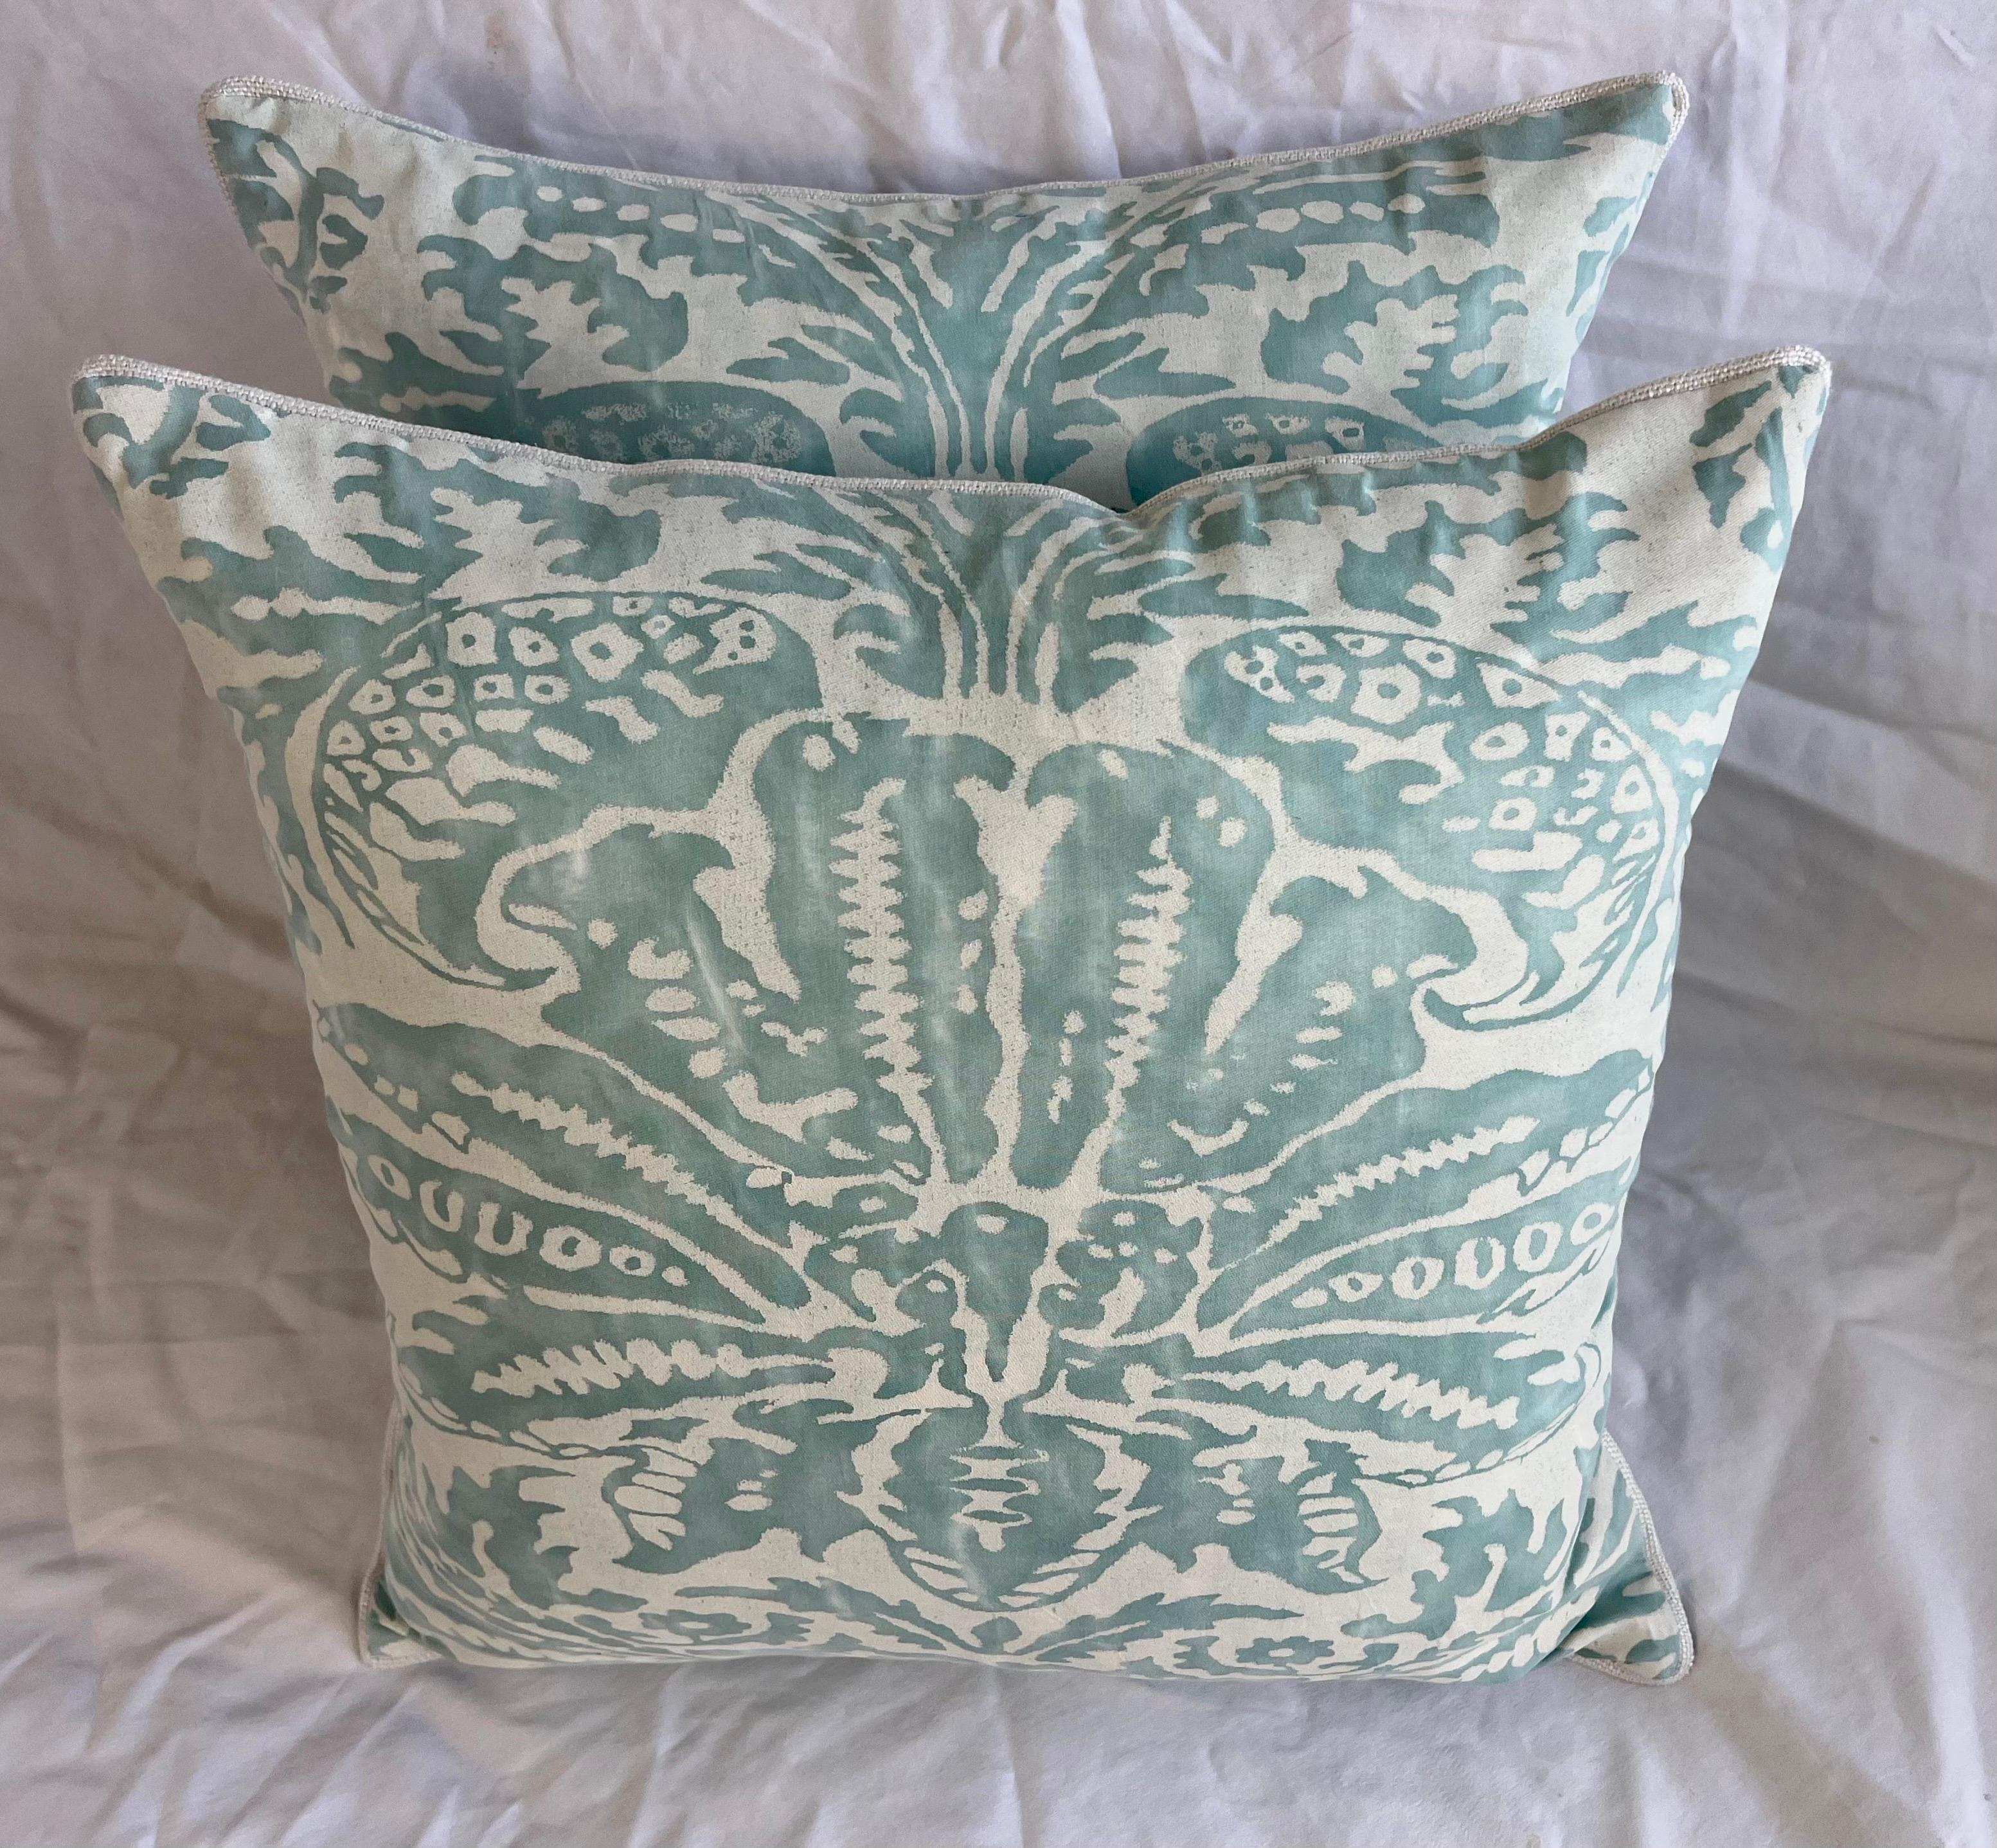 Pair of newly constructed pillows made with vintage aqua & white cotton fronts and natural linen backs. Down filled inserts, zipper closures.